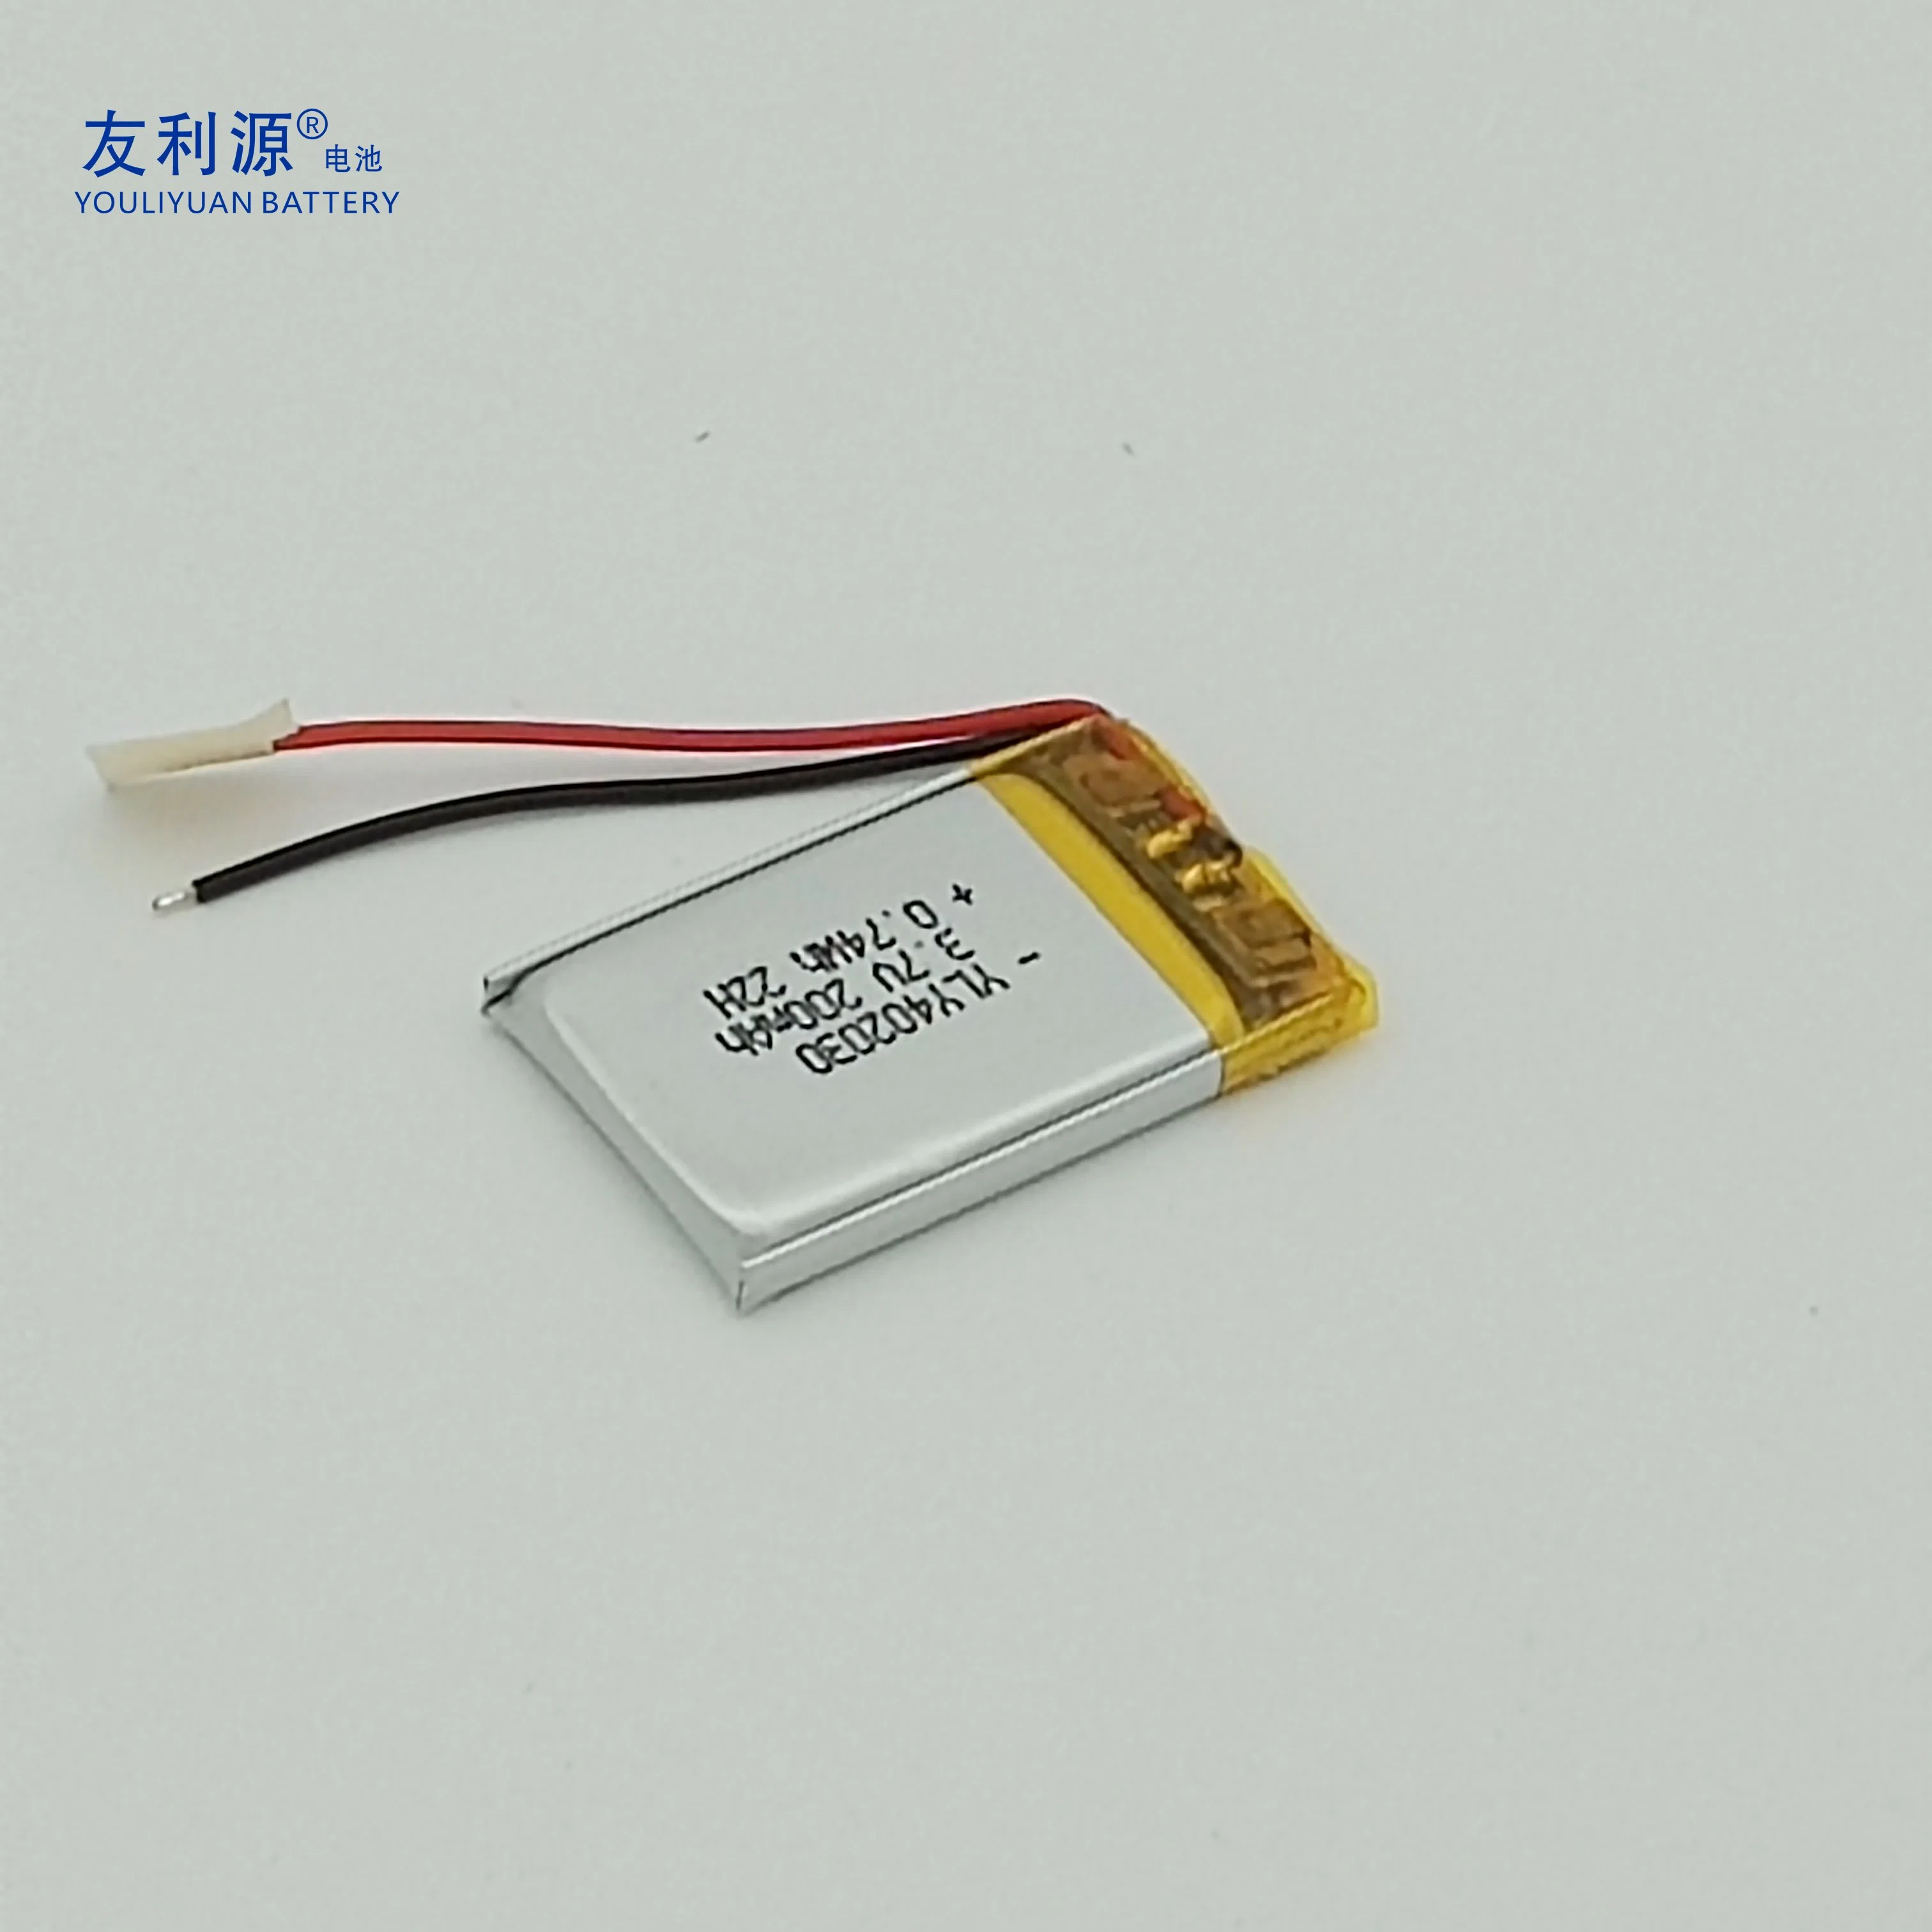 Factory Lithium Polymer Battery 402030 3.7V 200mAh Lipo Li-ion Battery for Mobile Phone/Iot Device/GPS Tracking/Hearing-Aid/Earphone